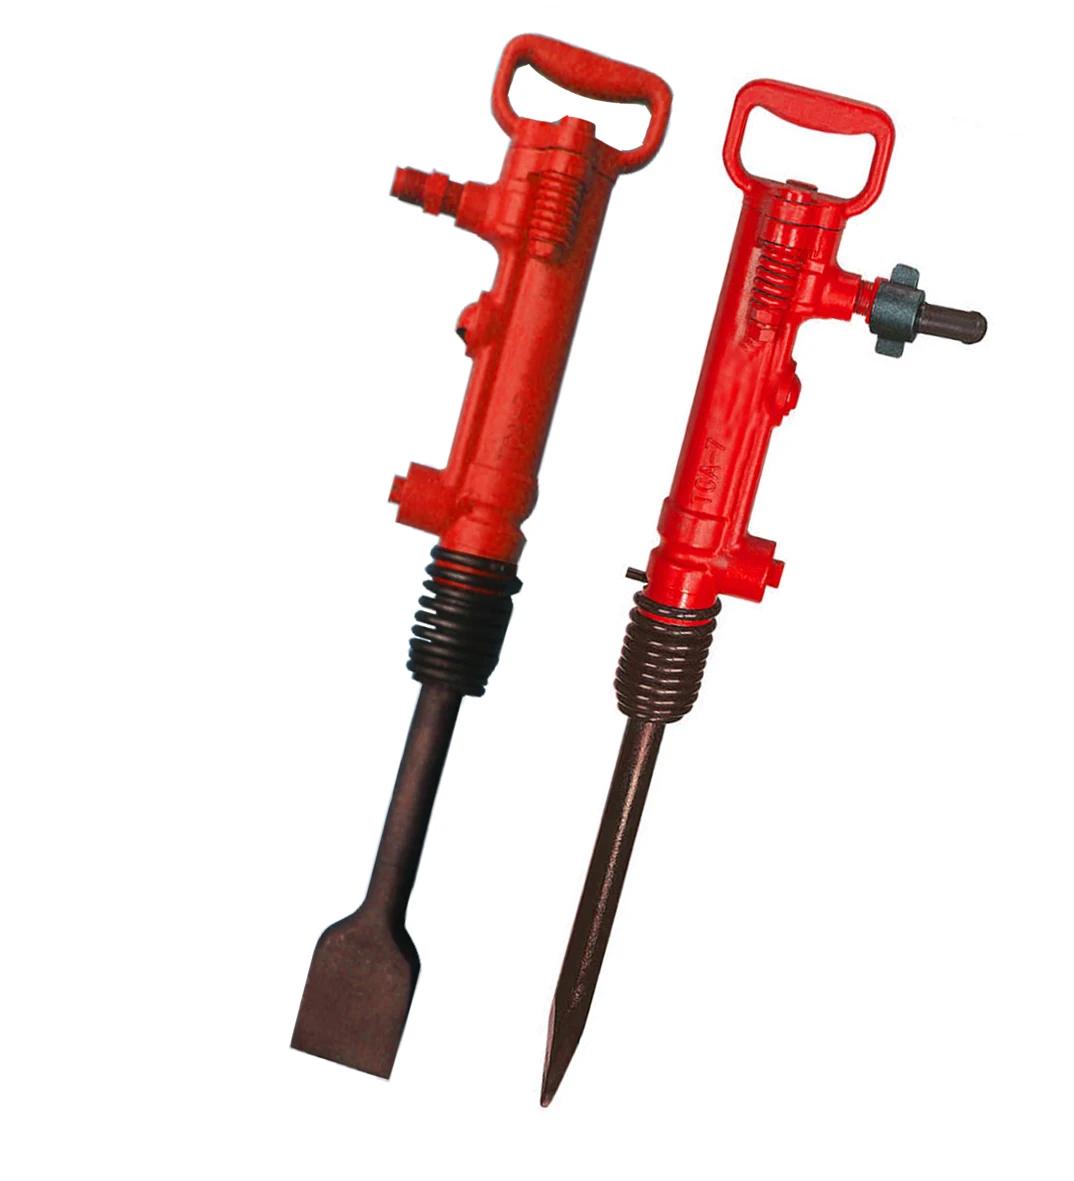 Tca-7 Hand Held Pneumatic Rock Drill Jack Hammer For Sale